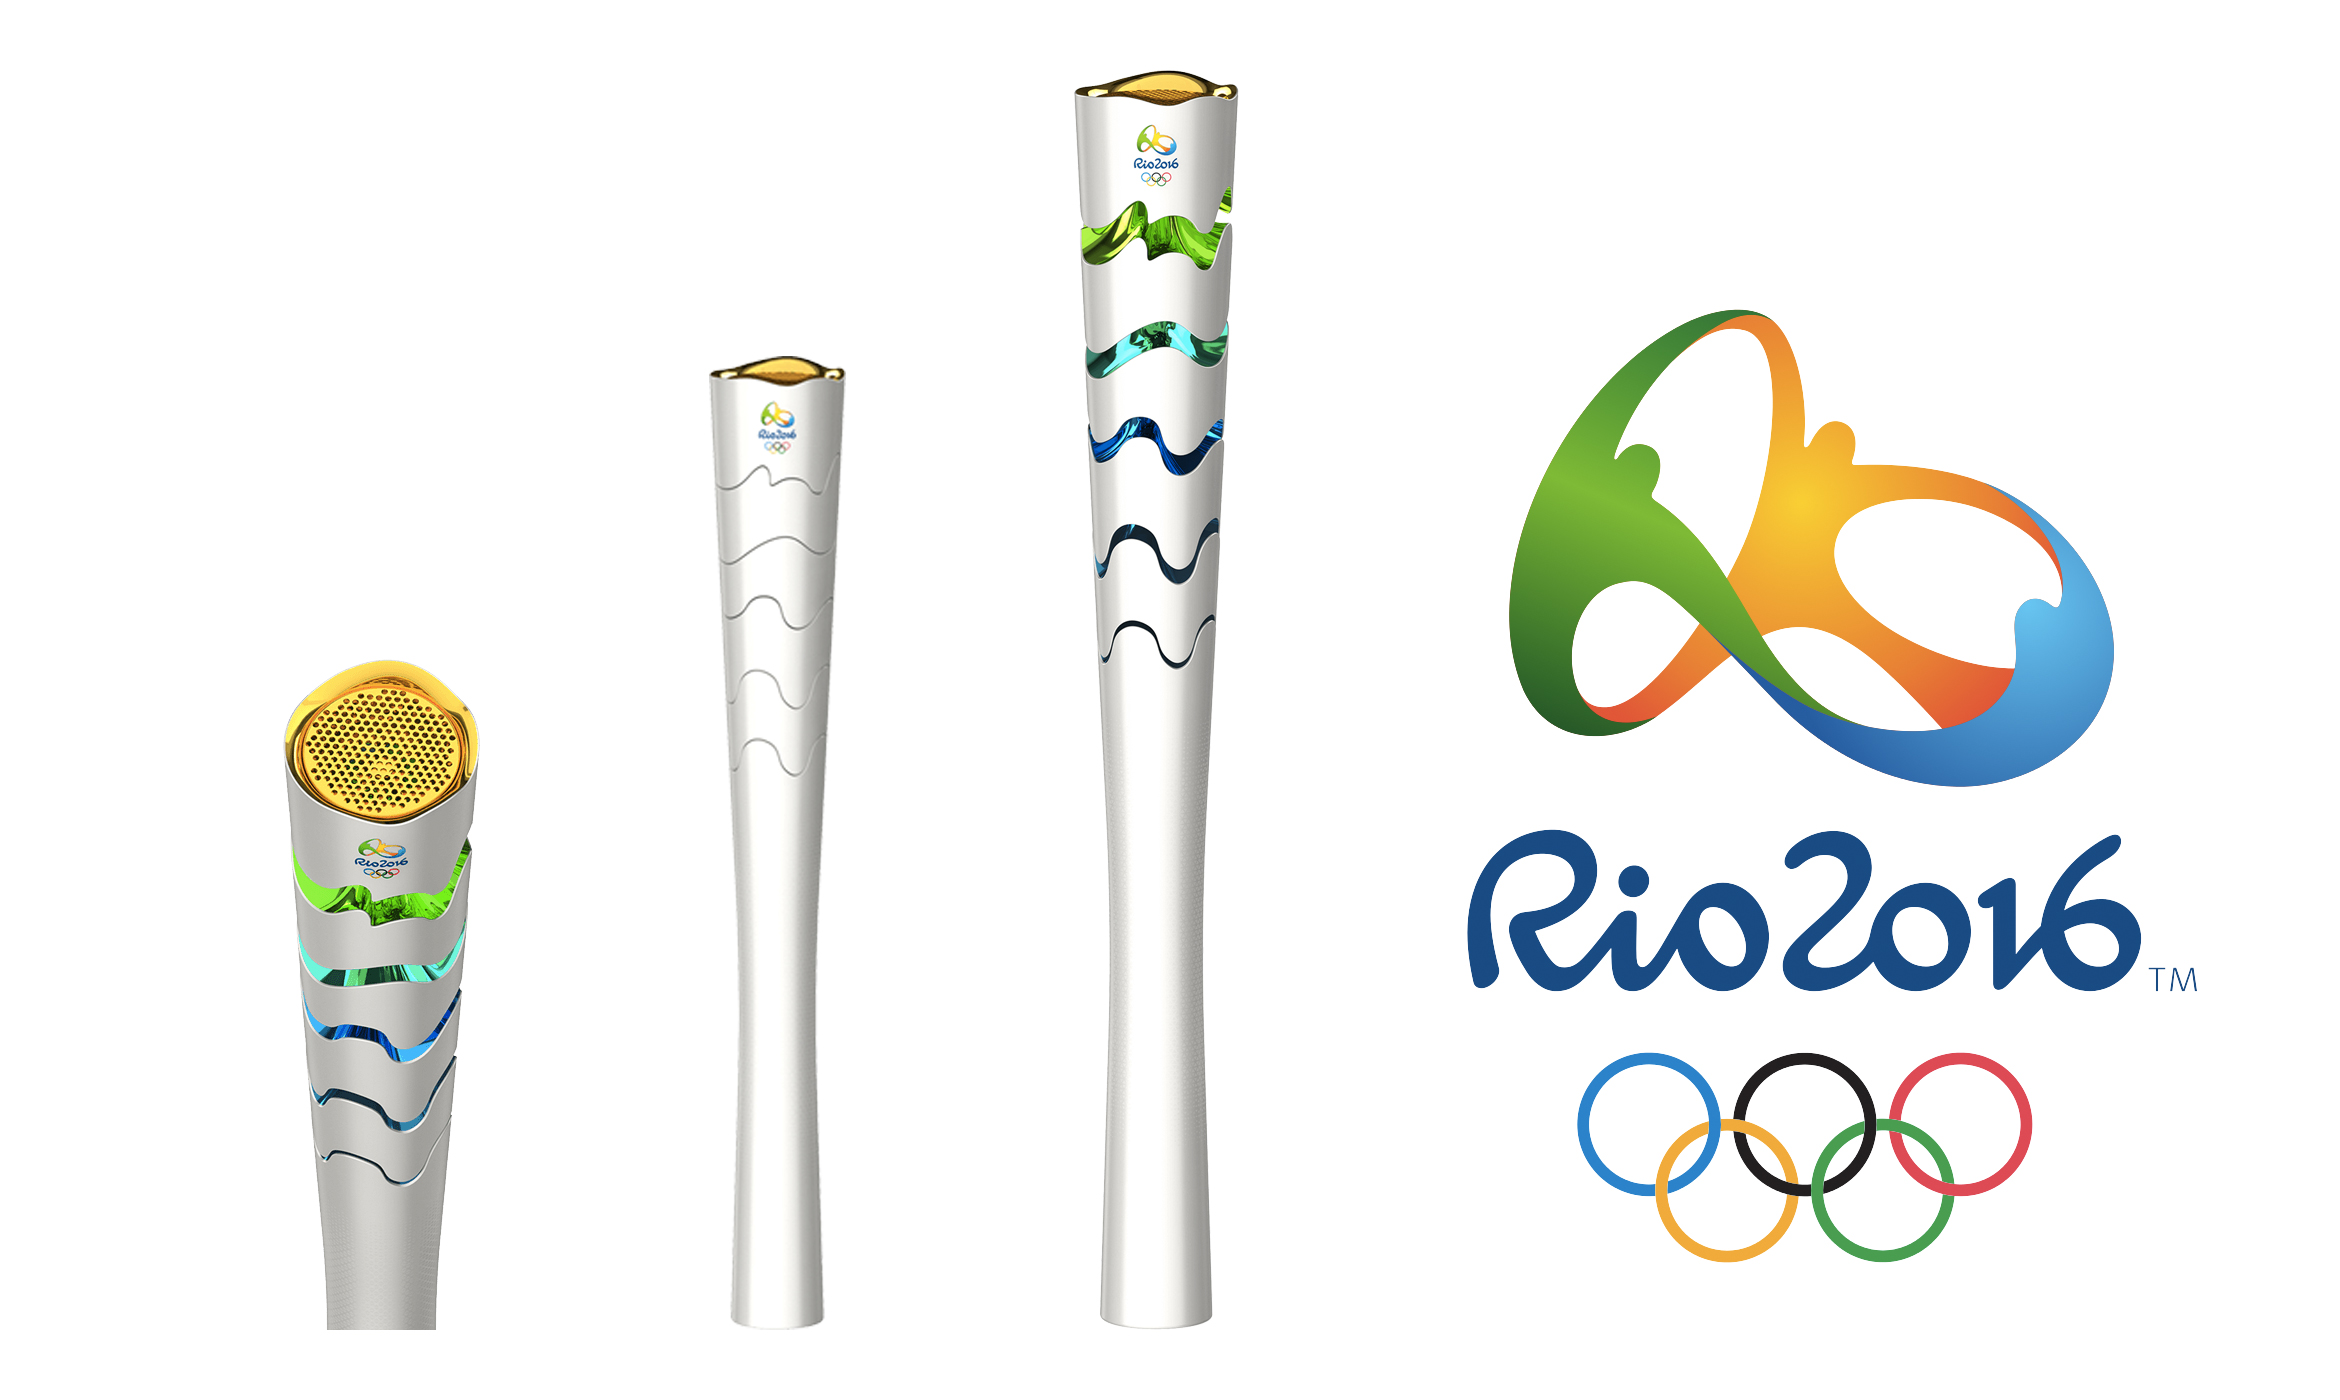 Olympic Torch Design, Rio 2016 Modern Gear For Life